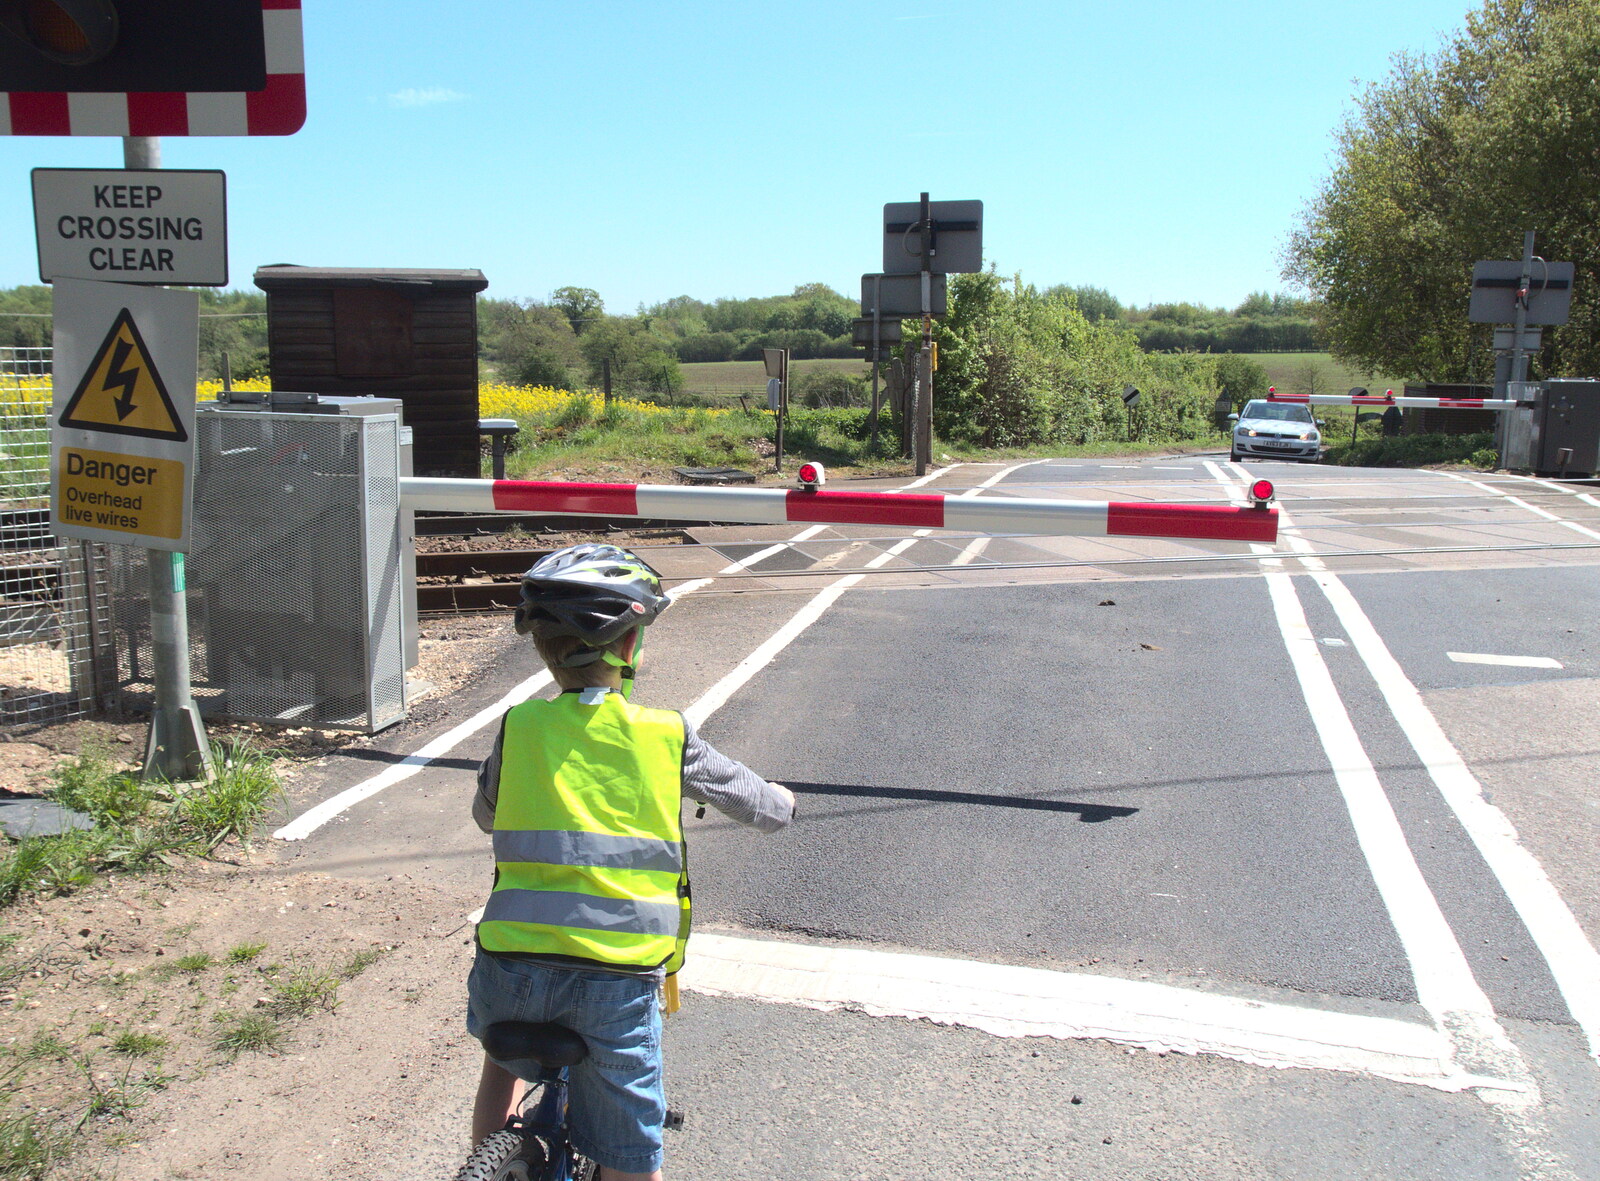 We wait at the level crossing from A Bike Ride to the Railway Tavern, Mellis, Suffolk - 7th May 2018